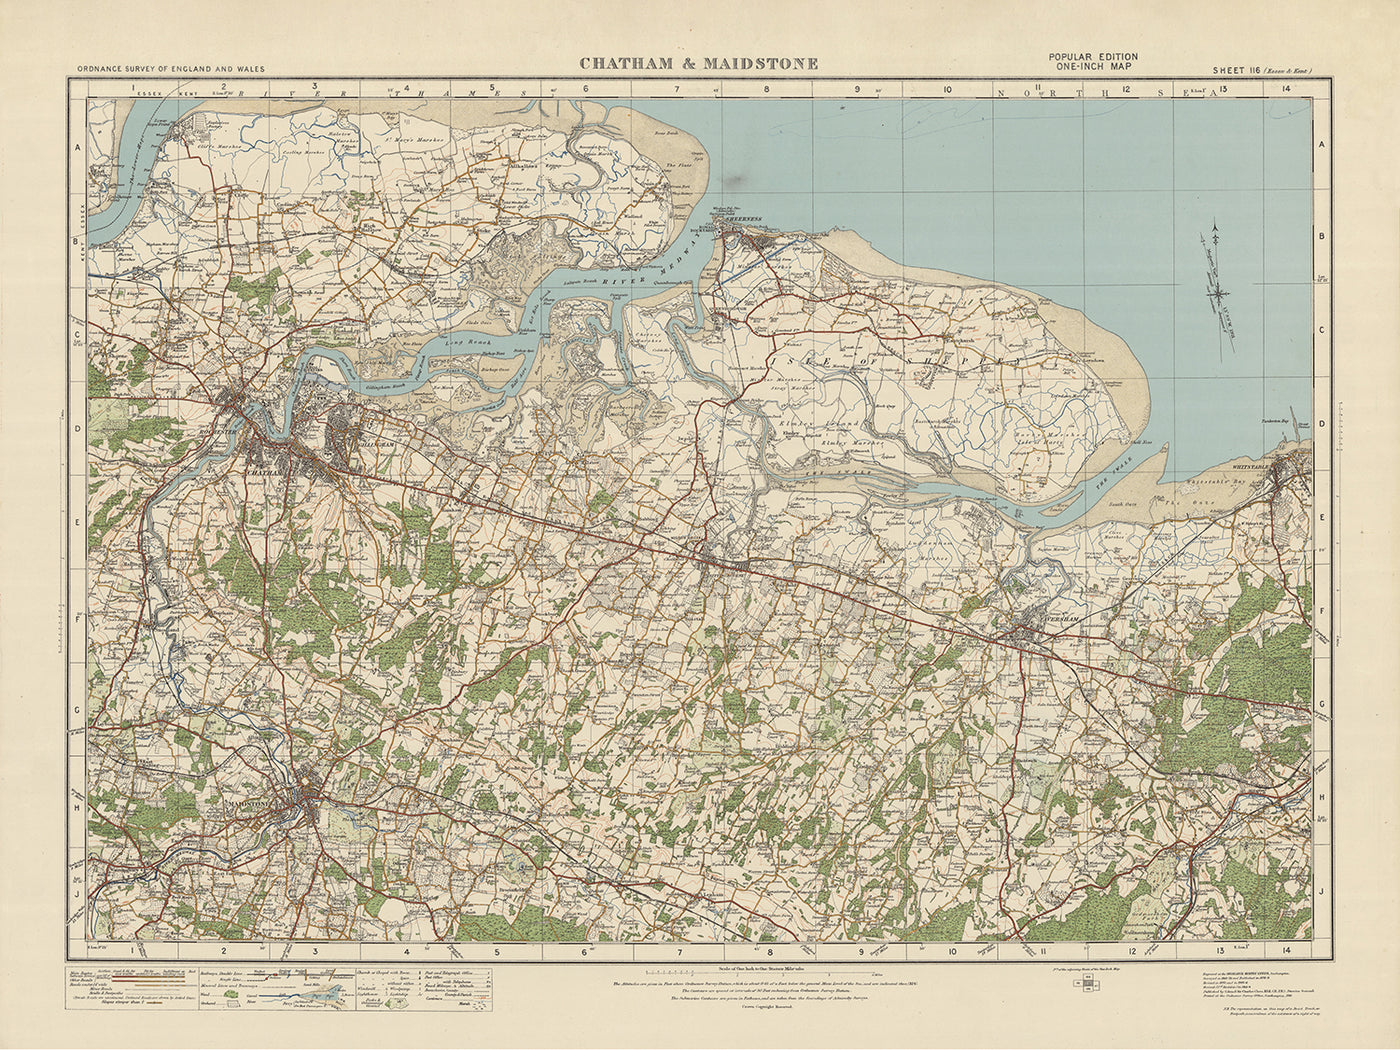 Carte Old Ordnance Survey, feuille 116 - Chatham & Maidstone, 1925 : Sheerness, Whitstable, Faversham, Rochester, île de Sheppey